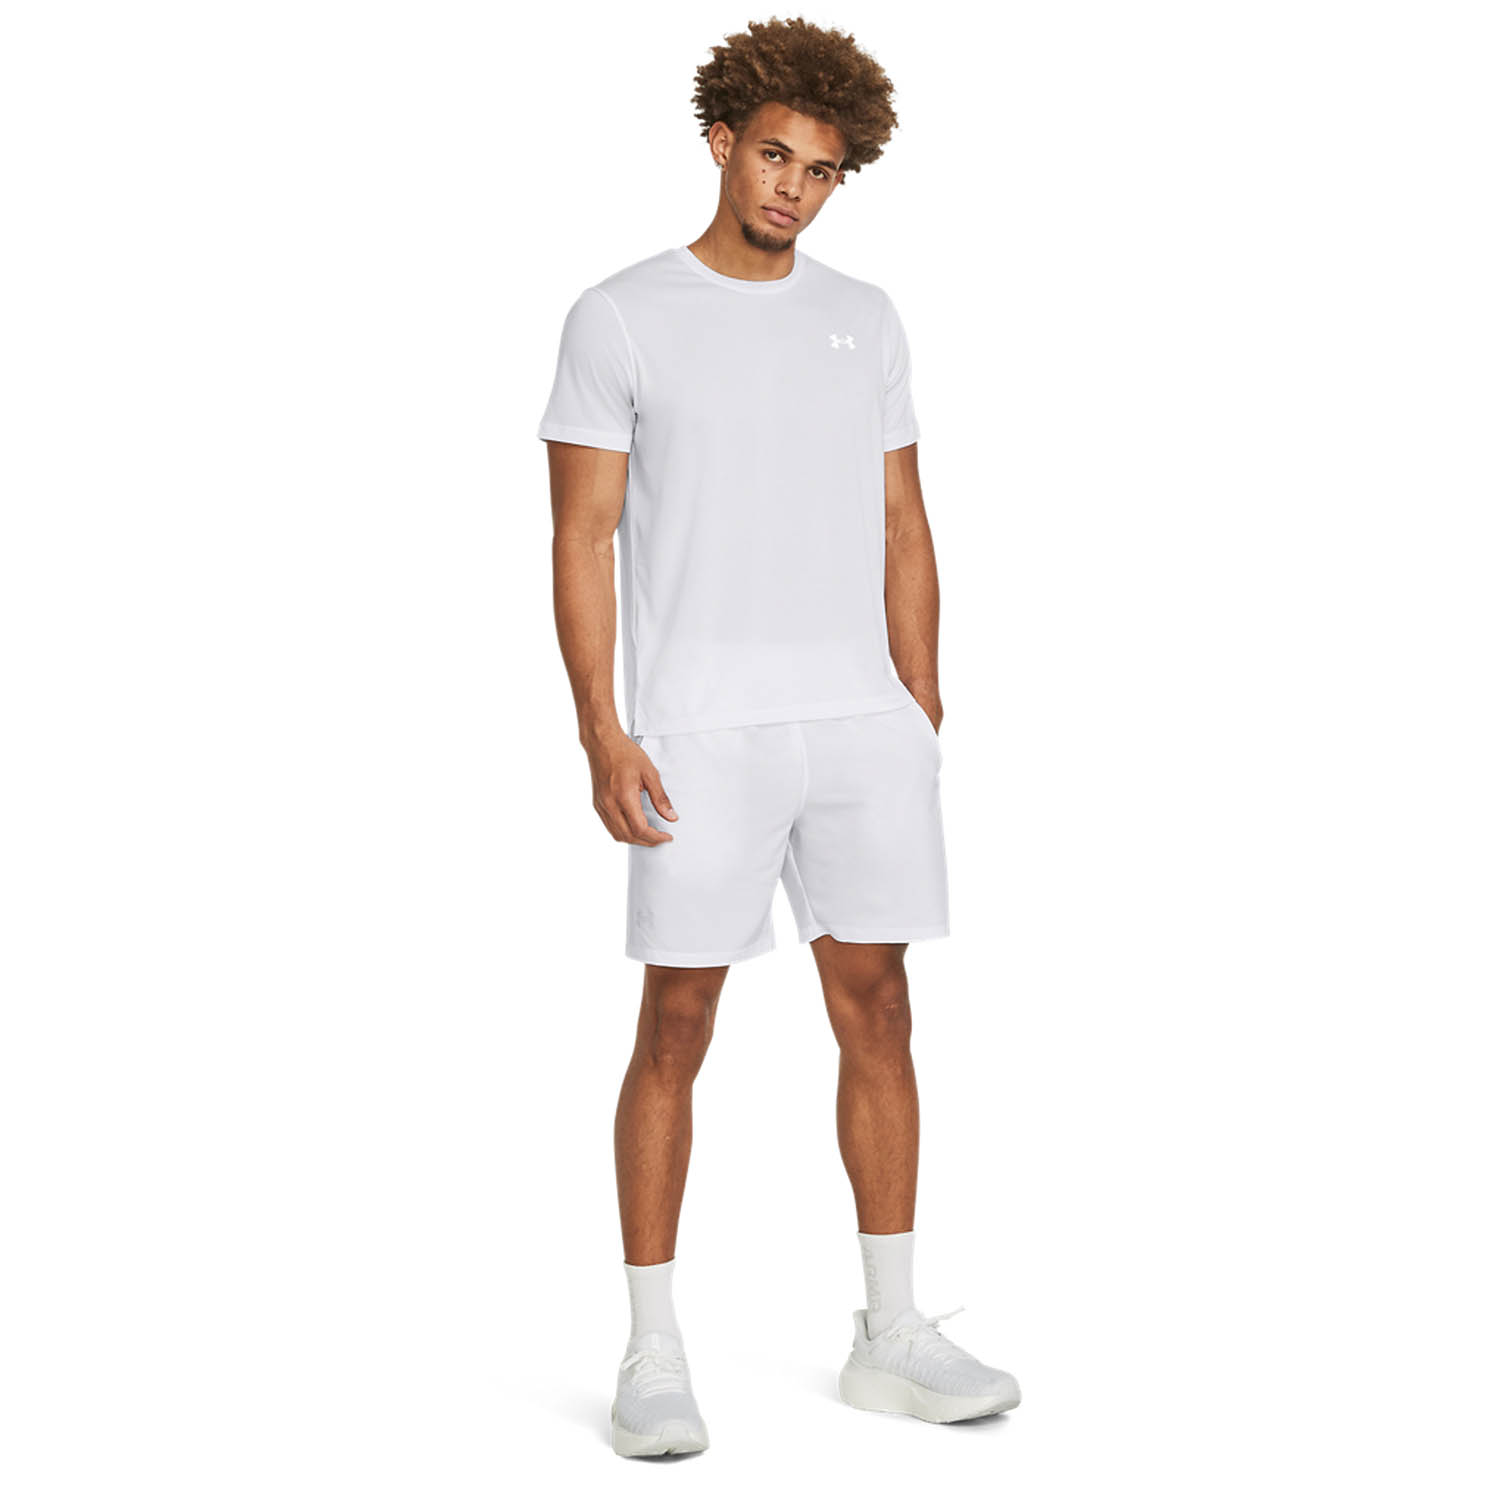 Under Armour Launch 7in Shorts - White/Reflective